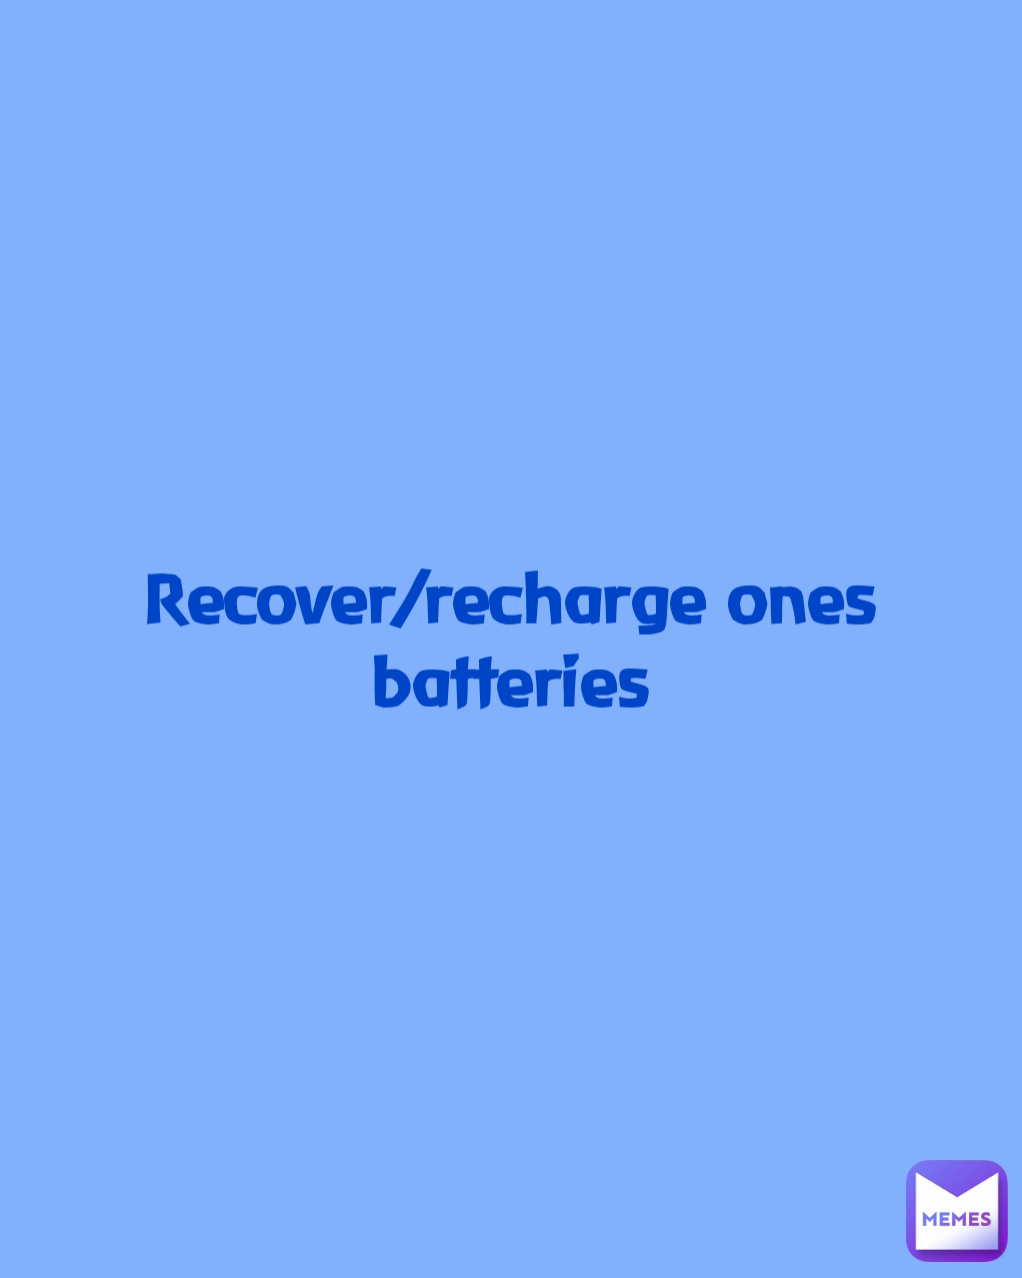 Recover/recharge ones batteries